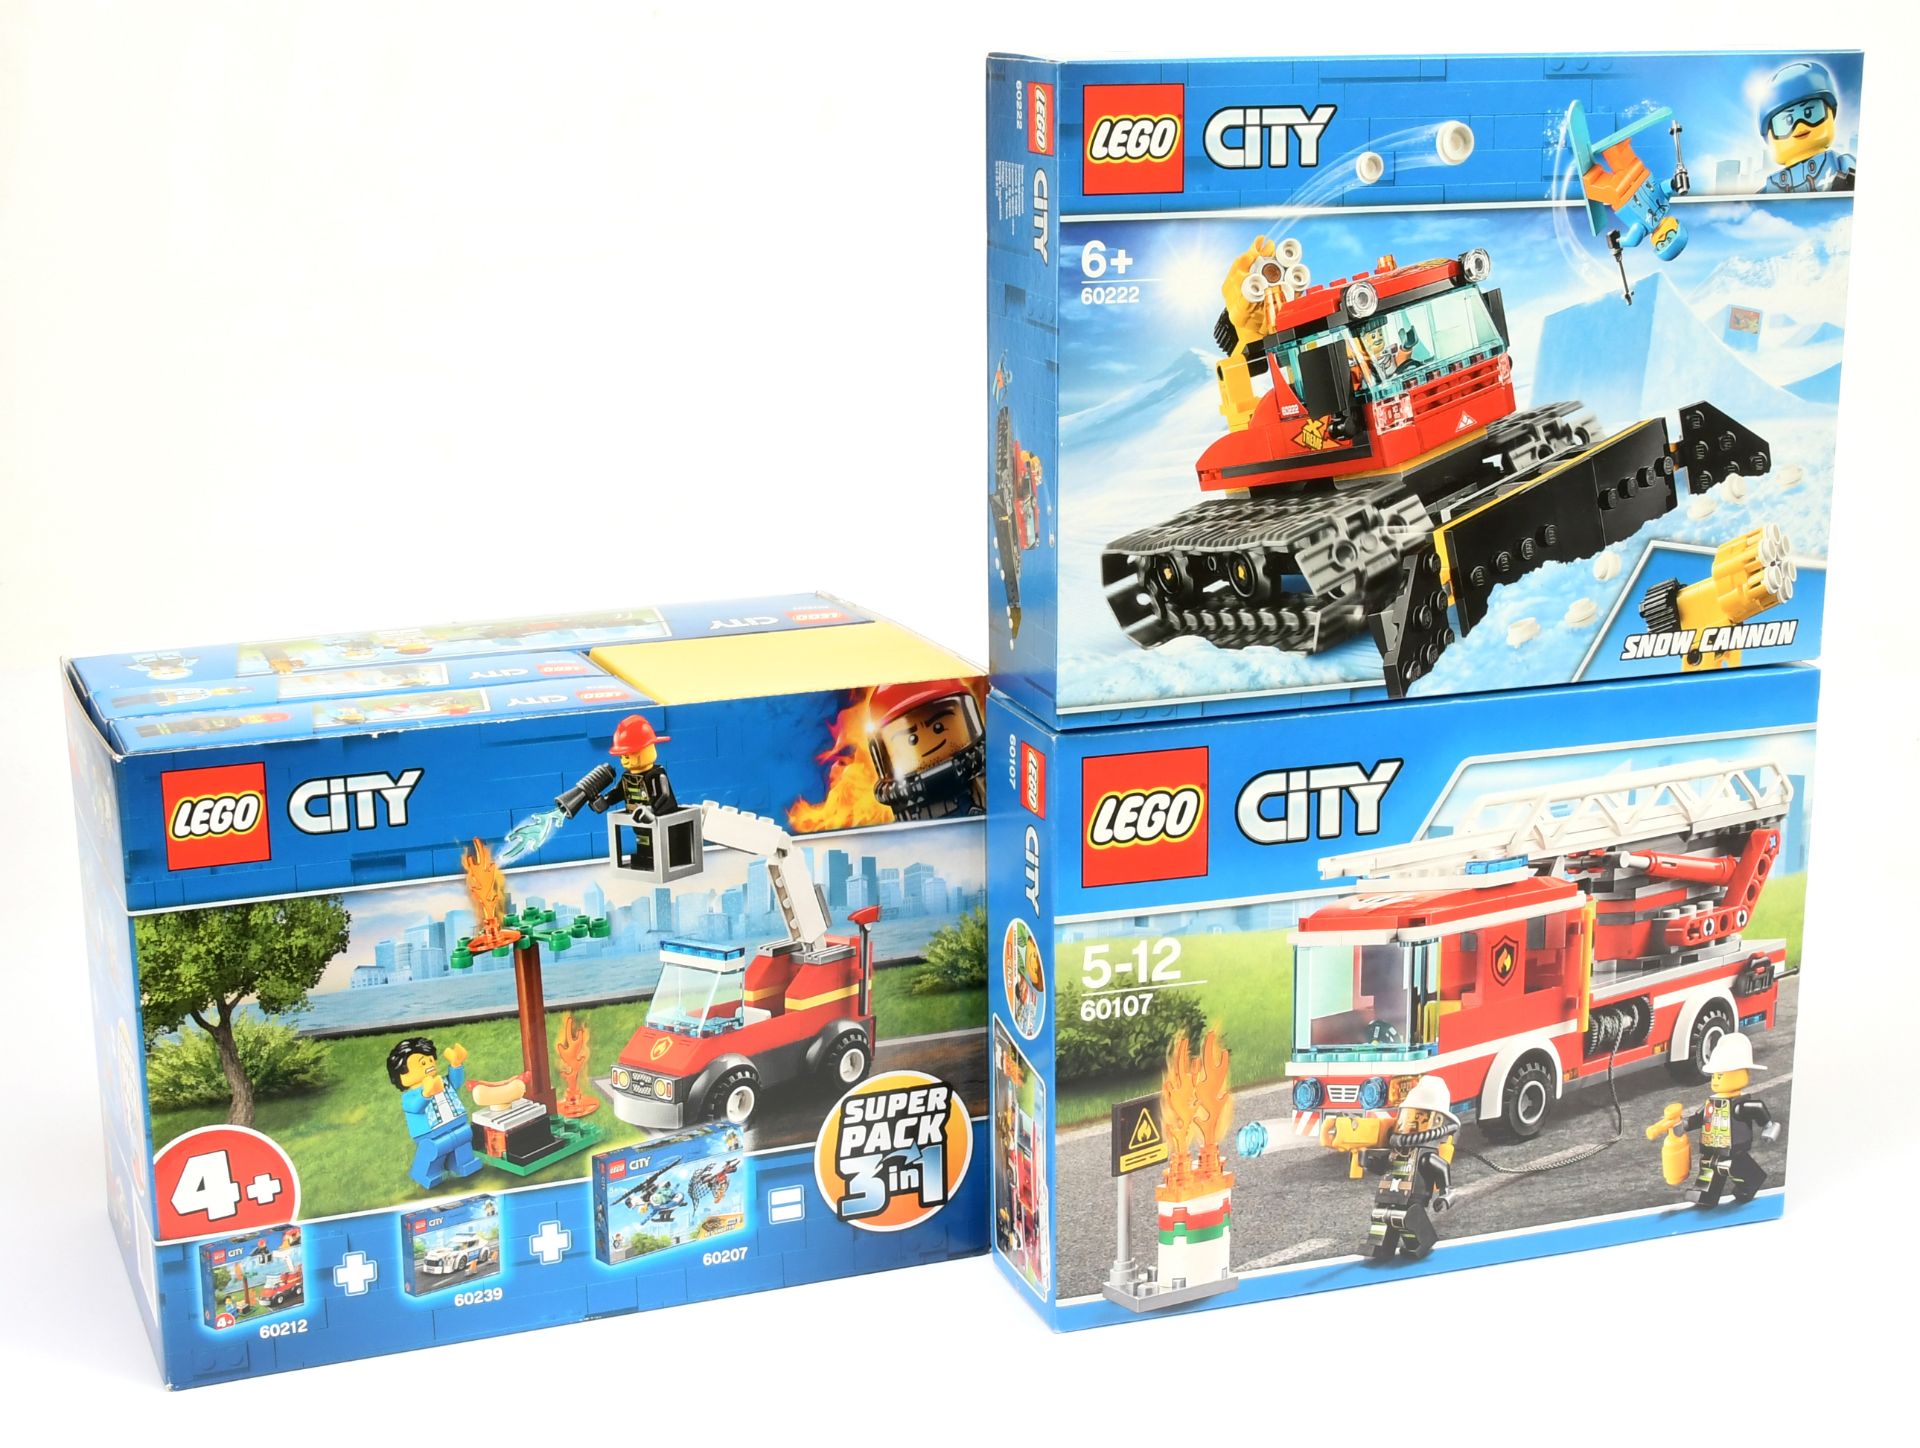 Lego City sets to include Super Pack 3 in 1 60207, 60239, 60212, Snow Groomer set 60222, Fire Lad...